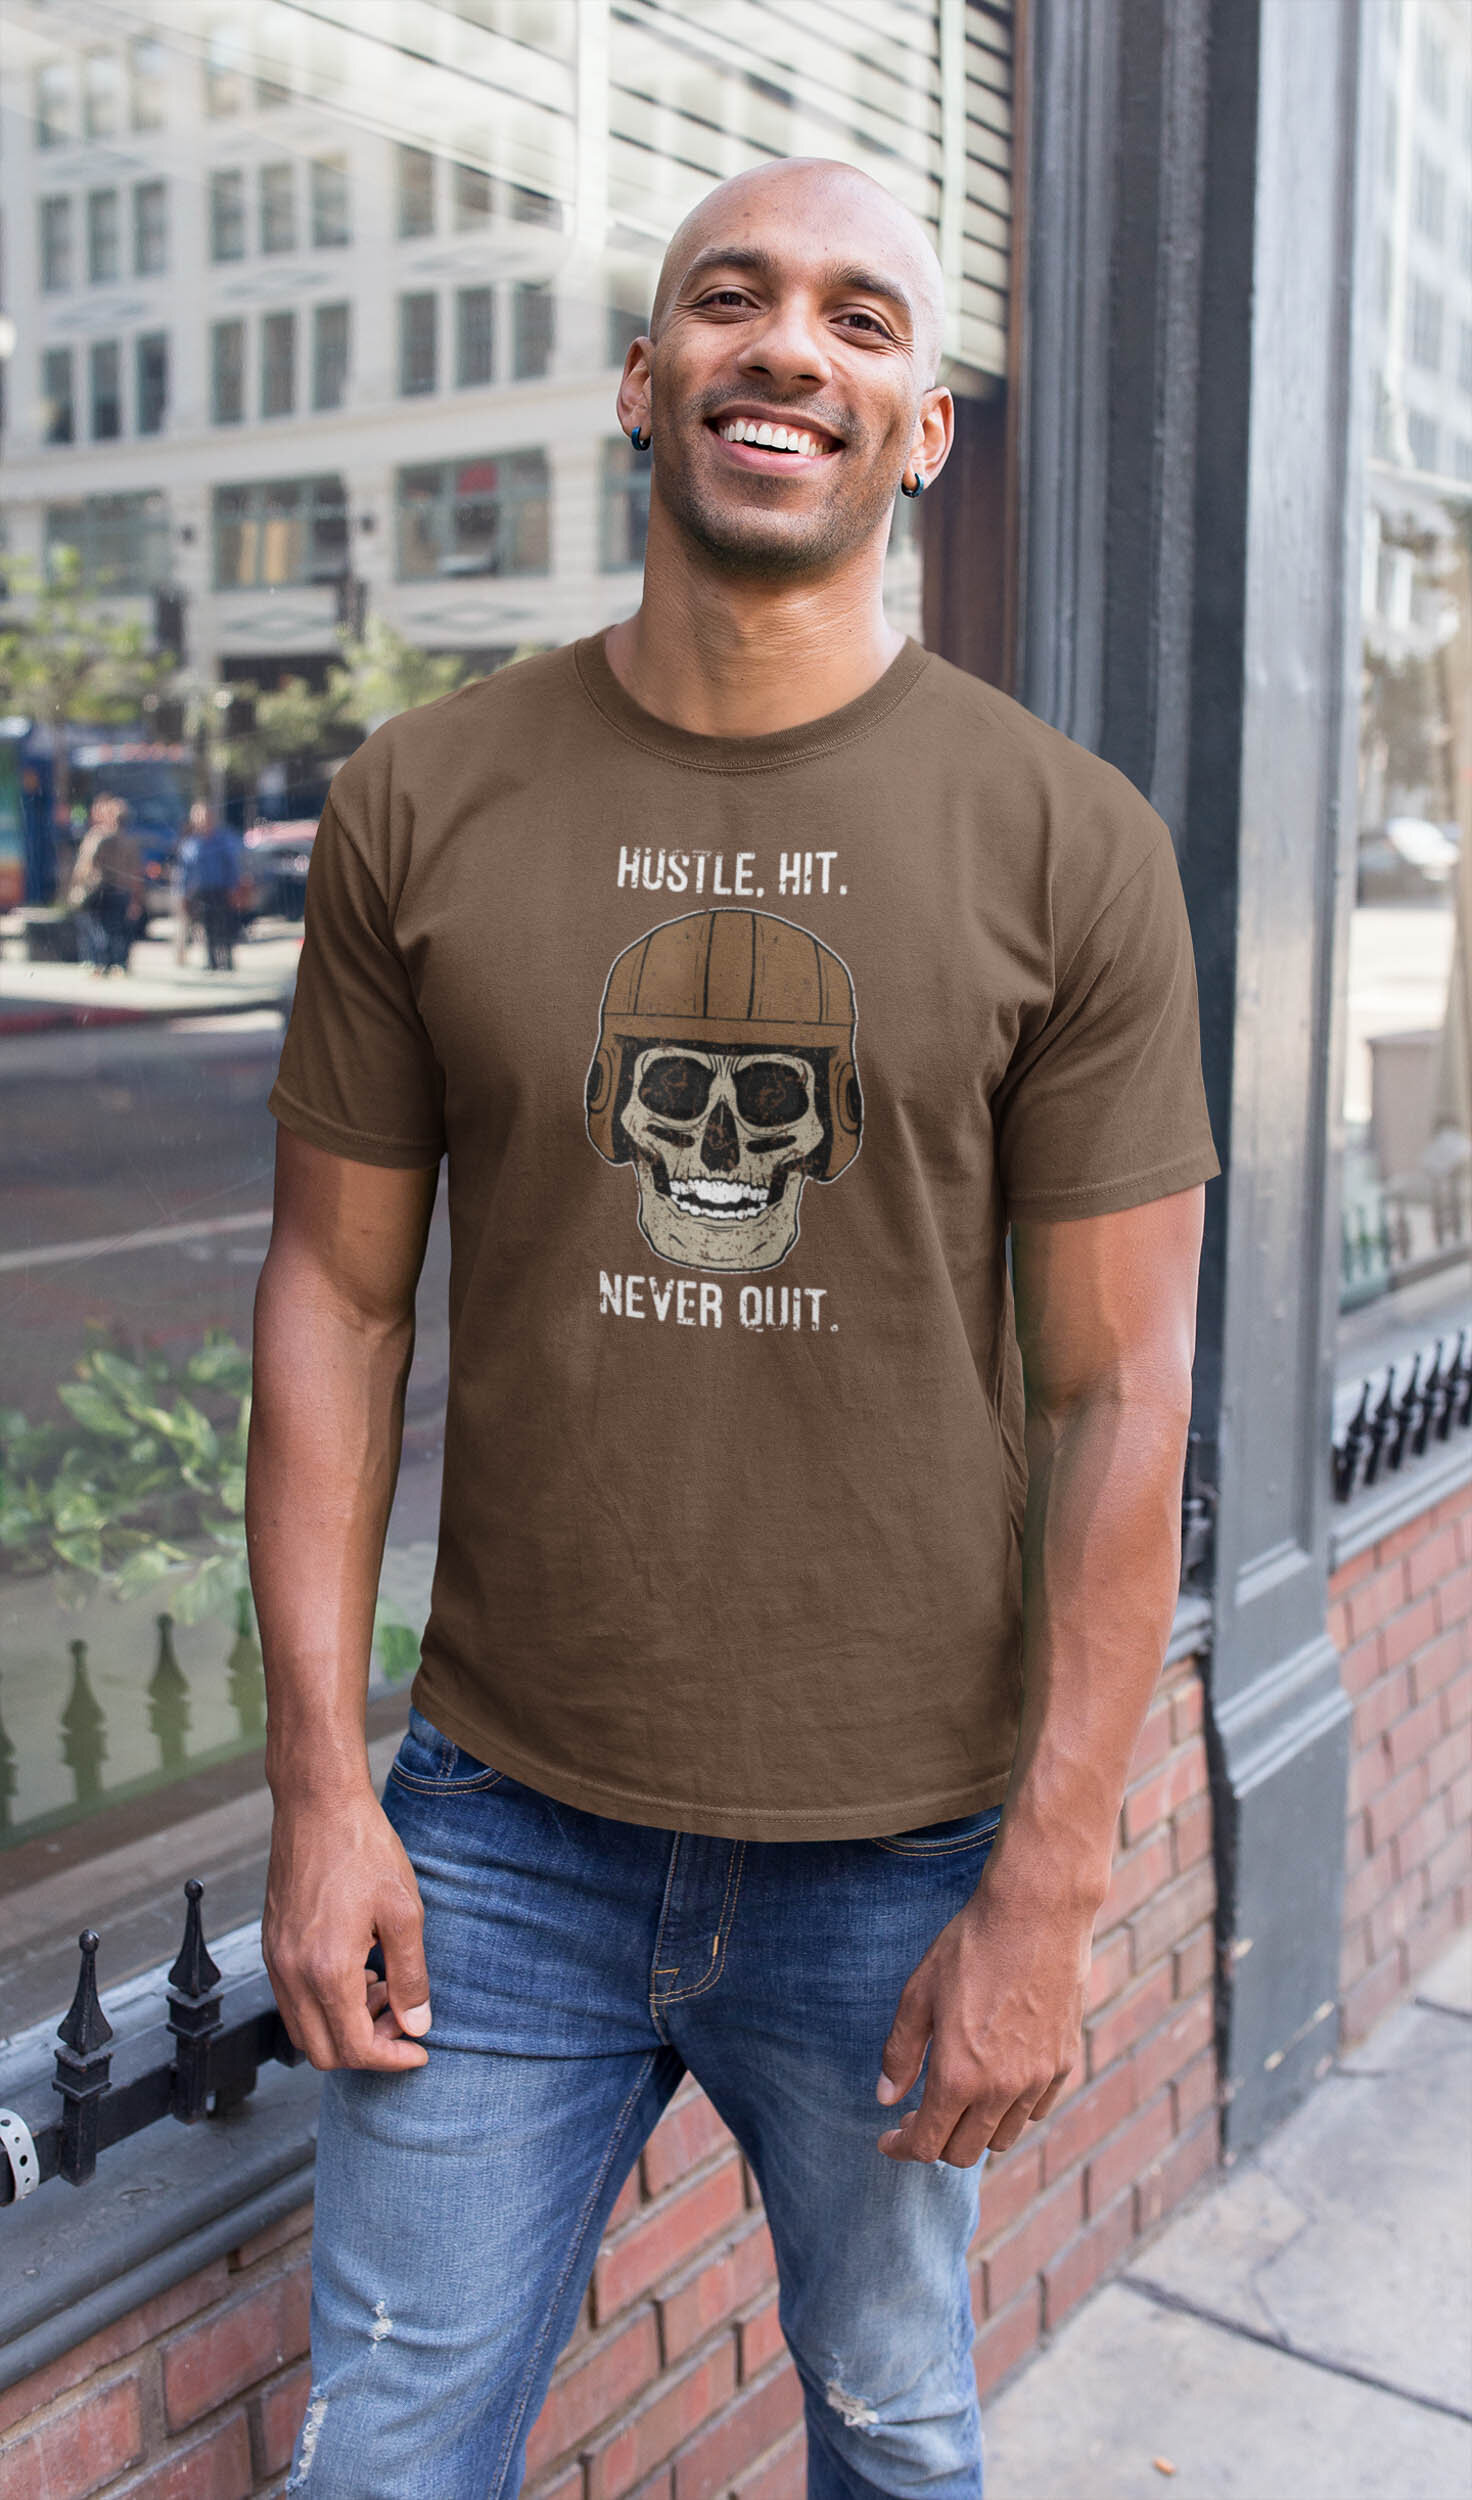 mockup-of-a-happy-bald-man-wearing-a-t-shirt-on-the-street-a18228.jpg